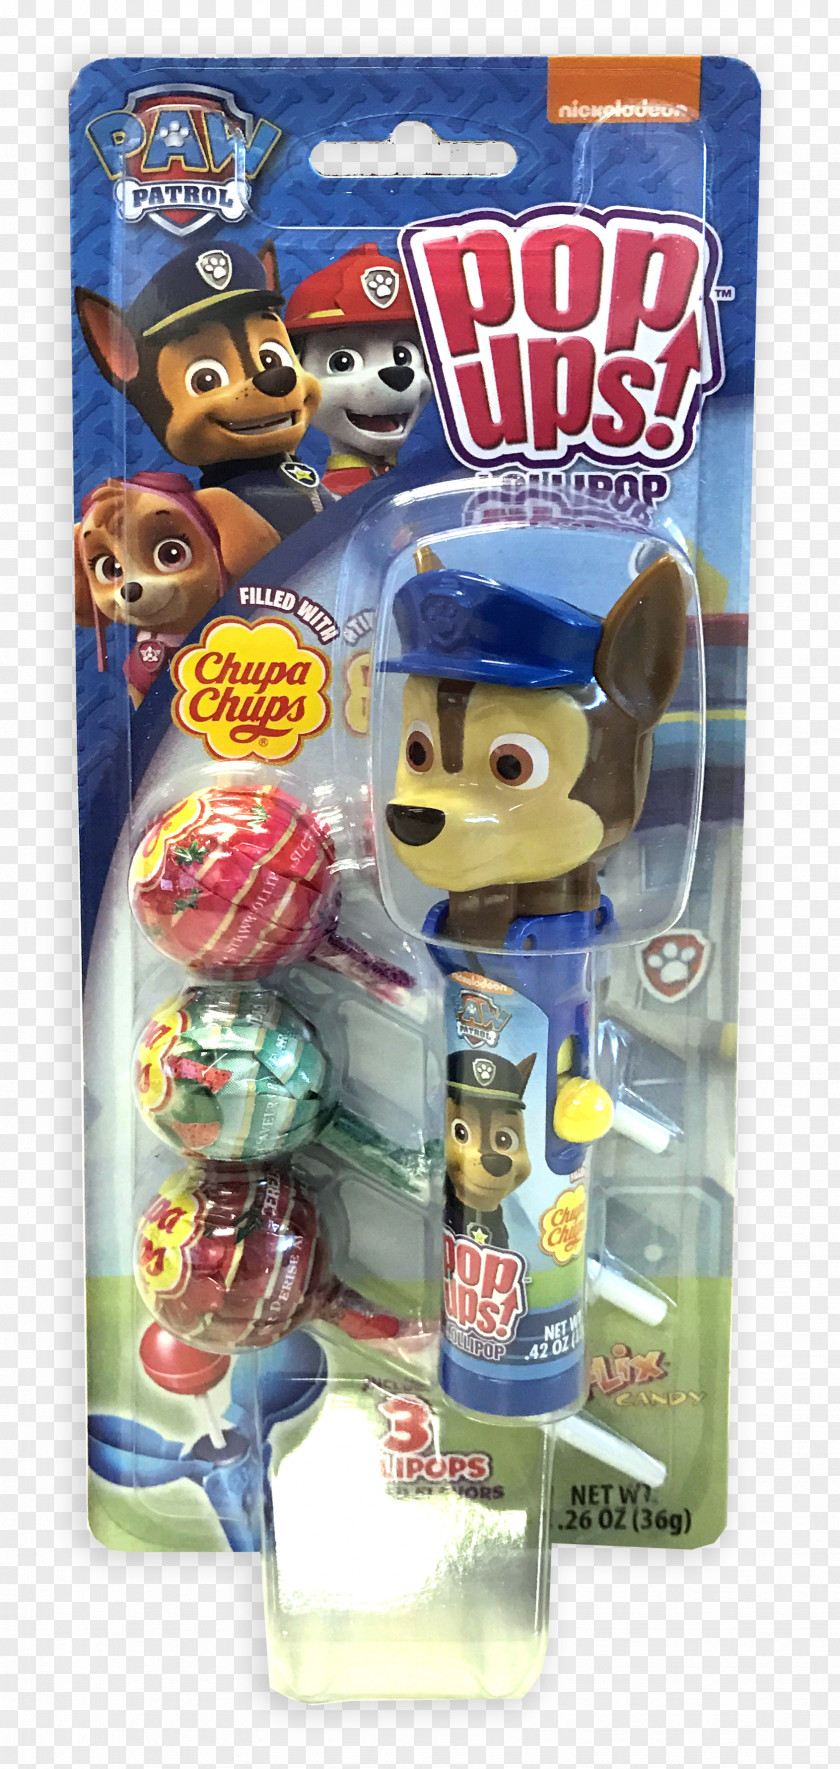 Paw Patrol Chase Postage Stamps Action Fiction Rubber Stamp & Toy Figures Tampon PNG